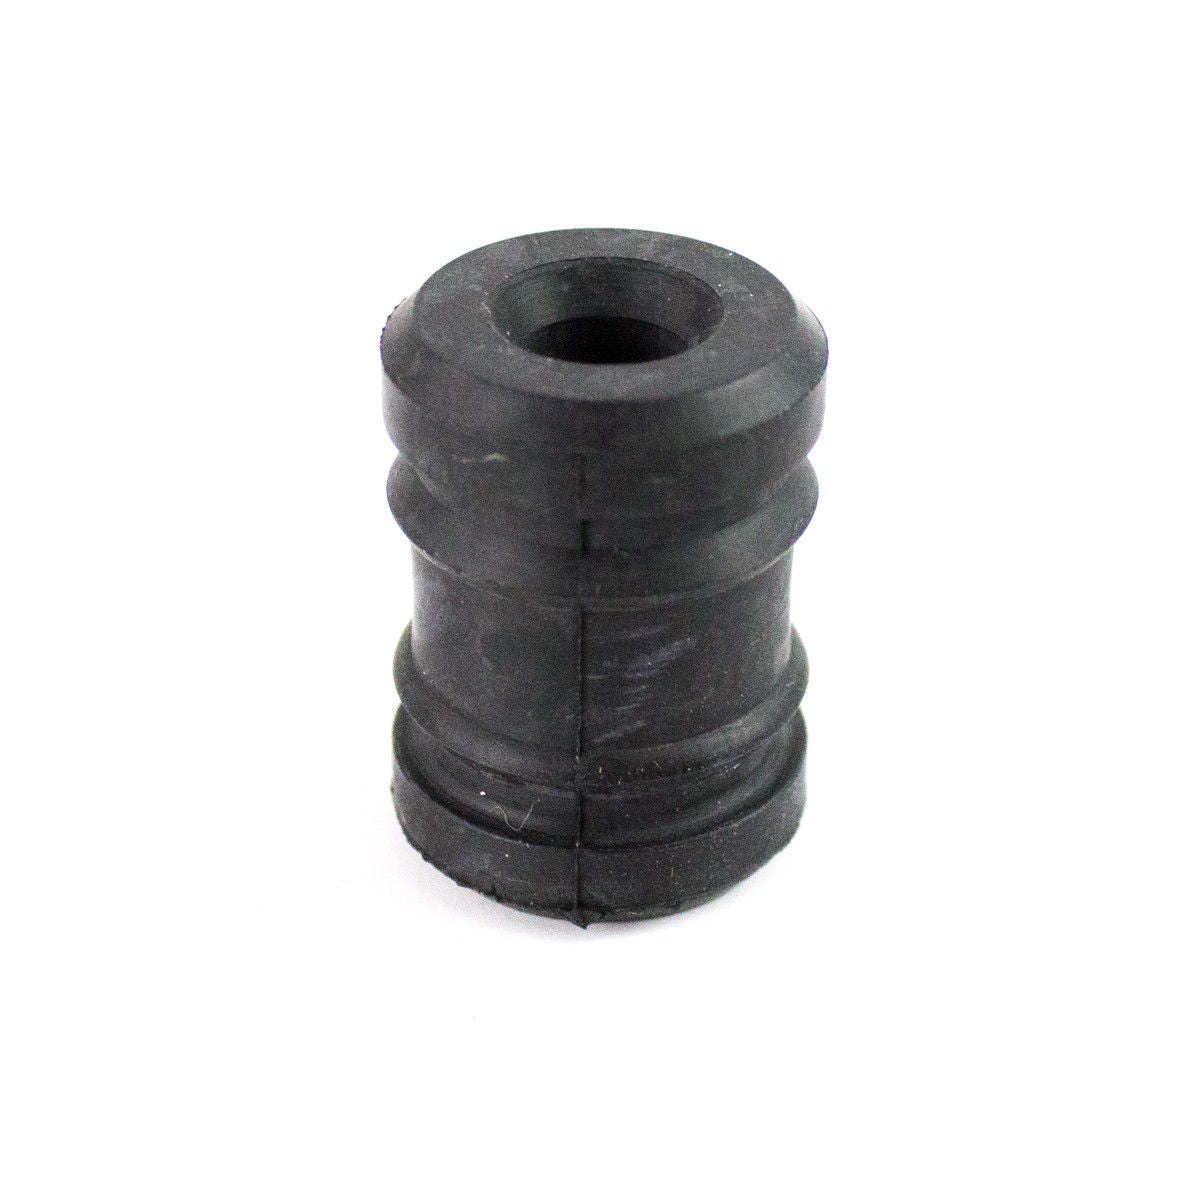 Rubber buffer annular mount for stihl chainsaw